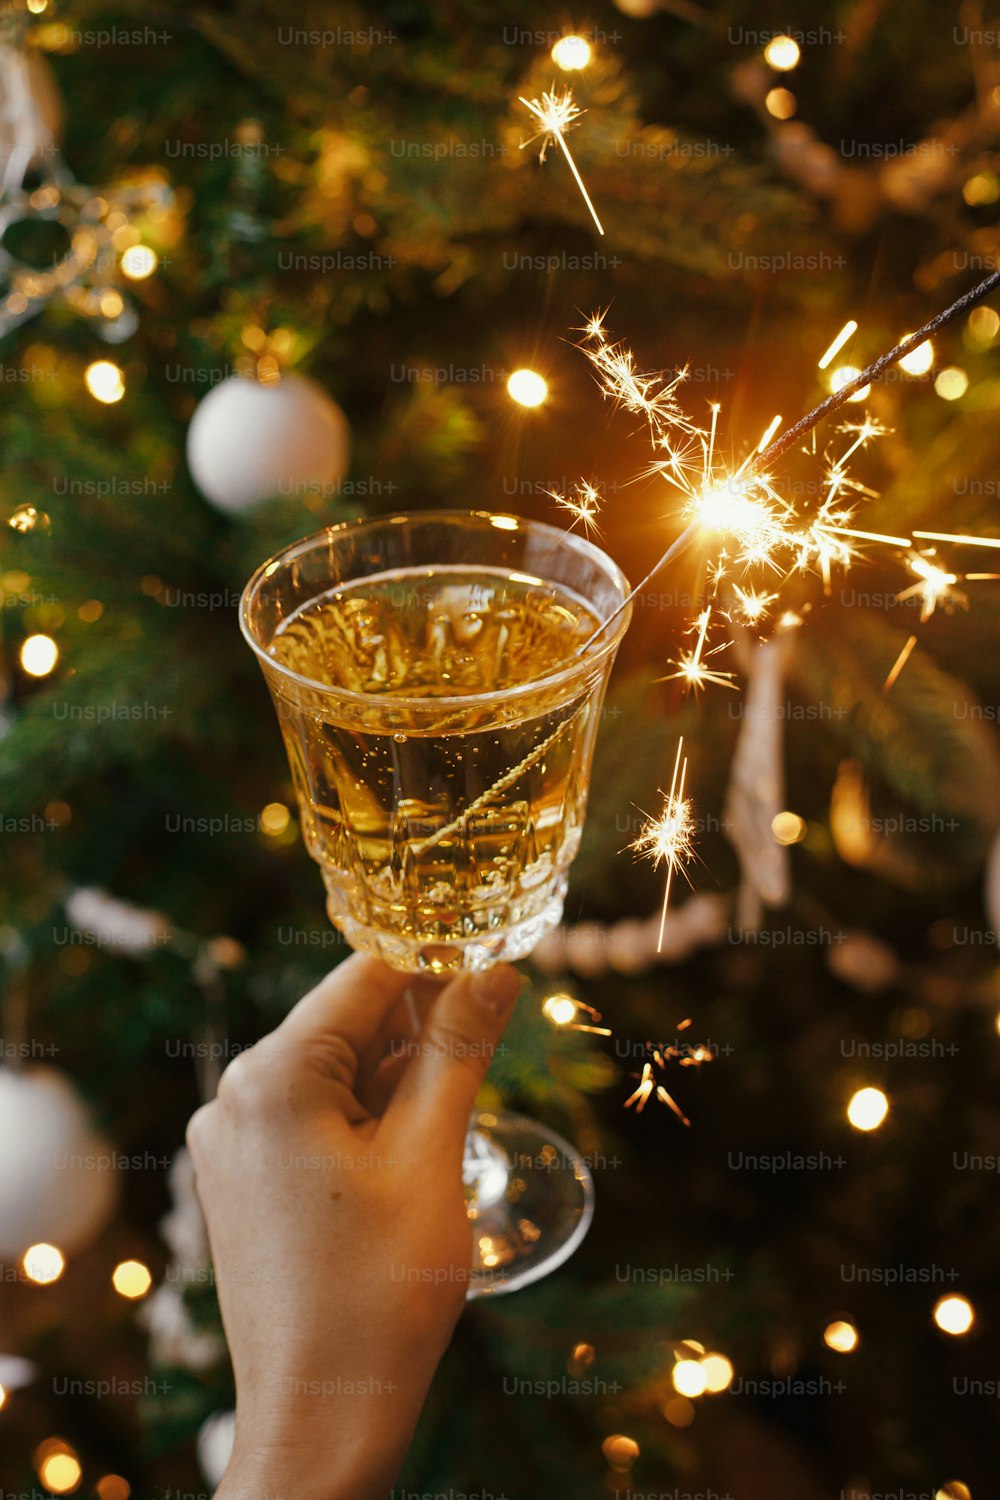 Woman celebrating with firework light in champagne glass on background of christmas tree lights. Happy New Year! Hands holding burning sparkler and drink in scandinavian room. Atmospheric moment